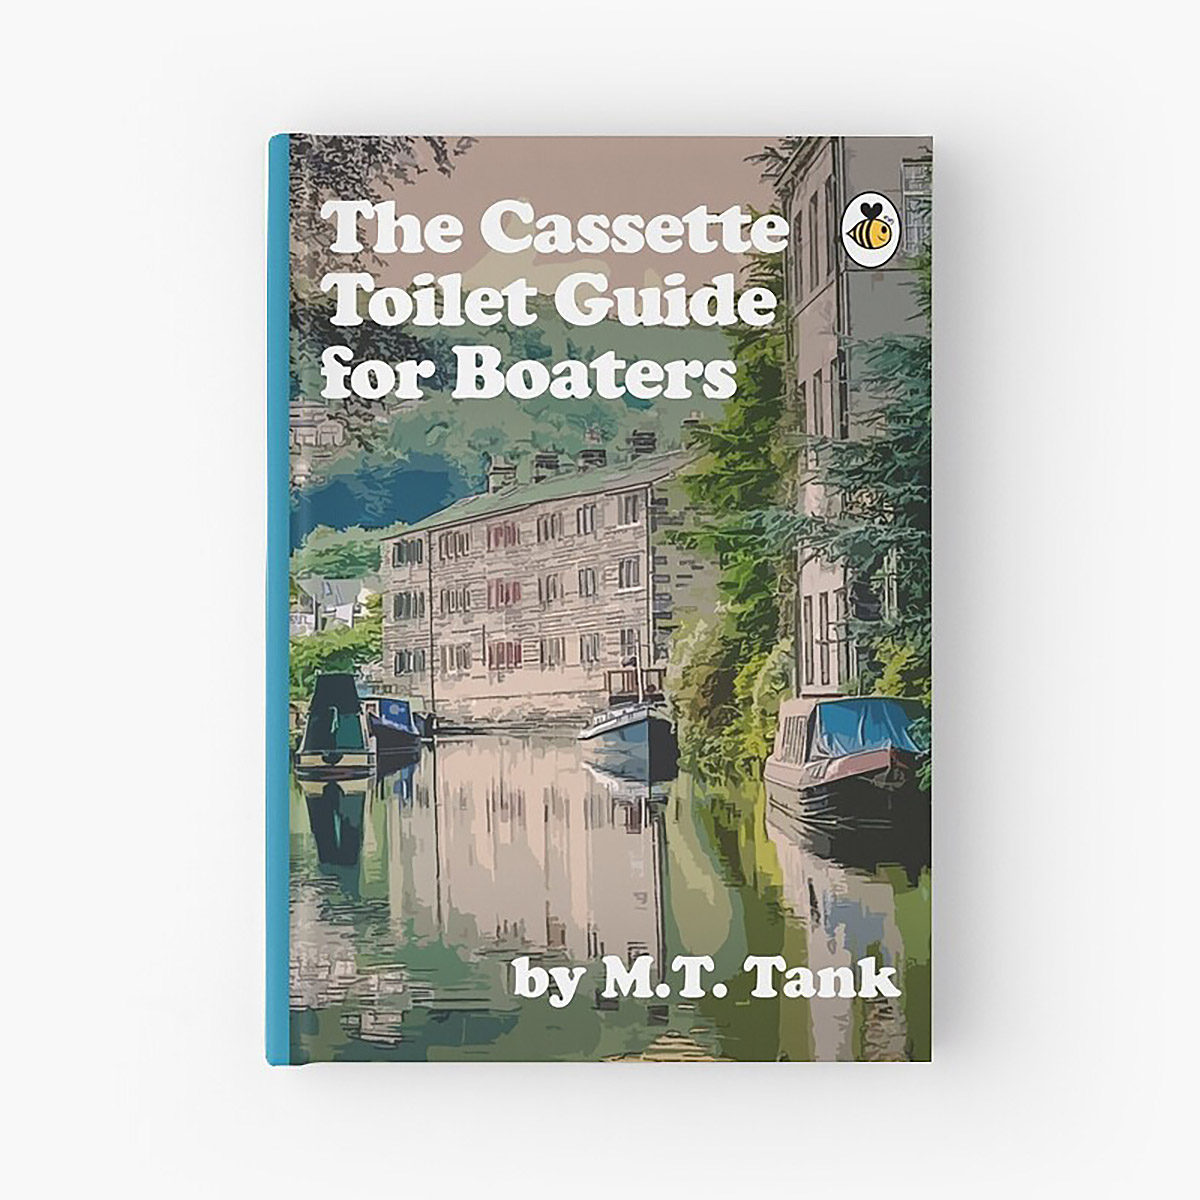 The Cassette Toilet Guide For Boaters - By M.T. Tank - Hardcover Journal - 